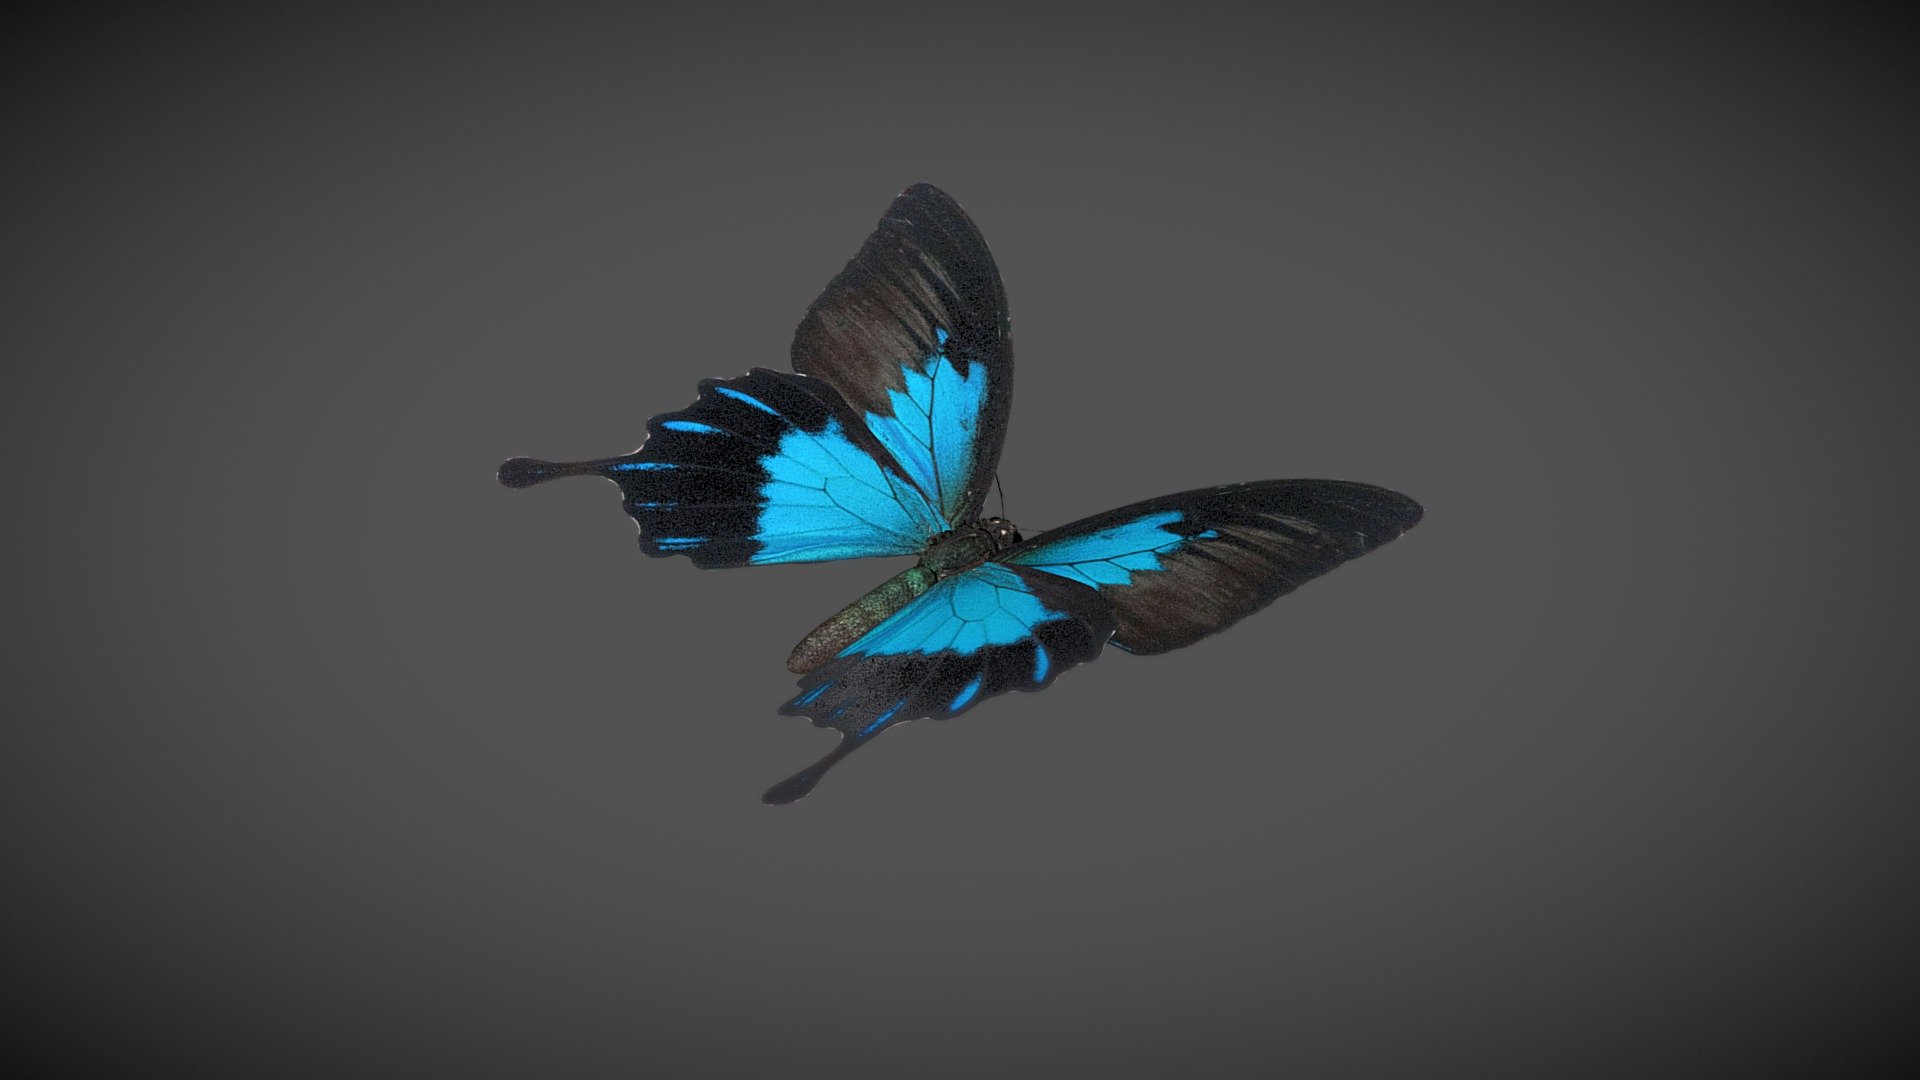 A butterfly model made for our VR project, Lepidoptera https://store.steampowered.com/app/2491860/Lepidoptera/?beta=0. It is a derivative of https://commons.wikimedia.org/wiki/File:PapilioUlyssesTelegonusMUpUnAC1.jpg by Accassidy, CC BY-SA 4.0 https://creativecommons.org/licenses/by-sa/4.0, via Wikimedia Commons 3d model